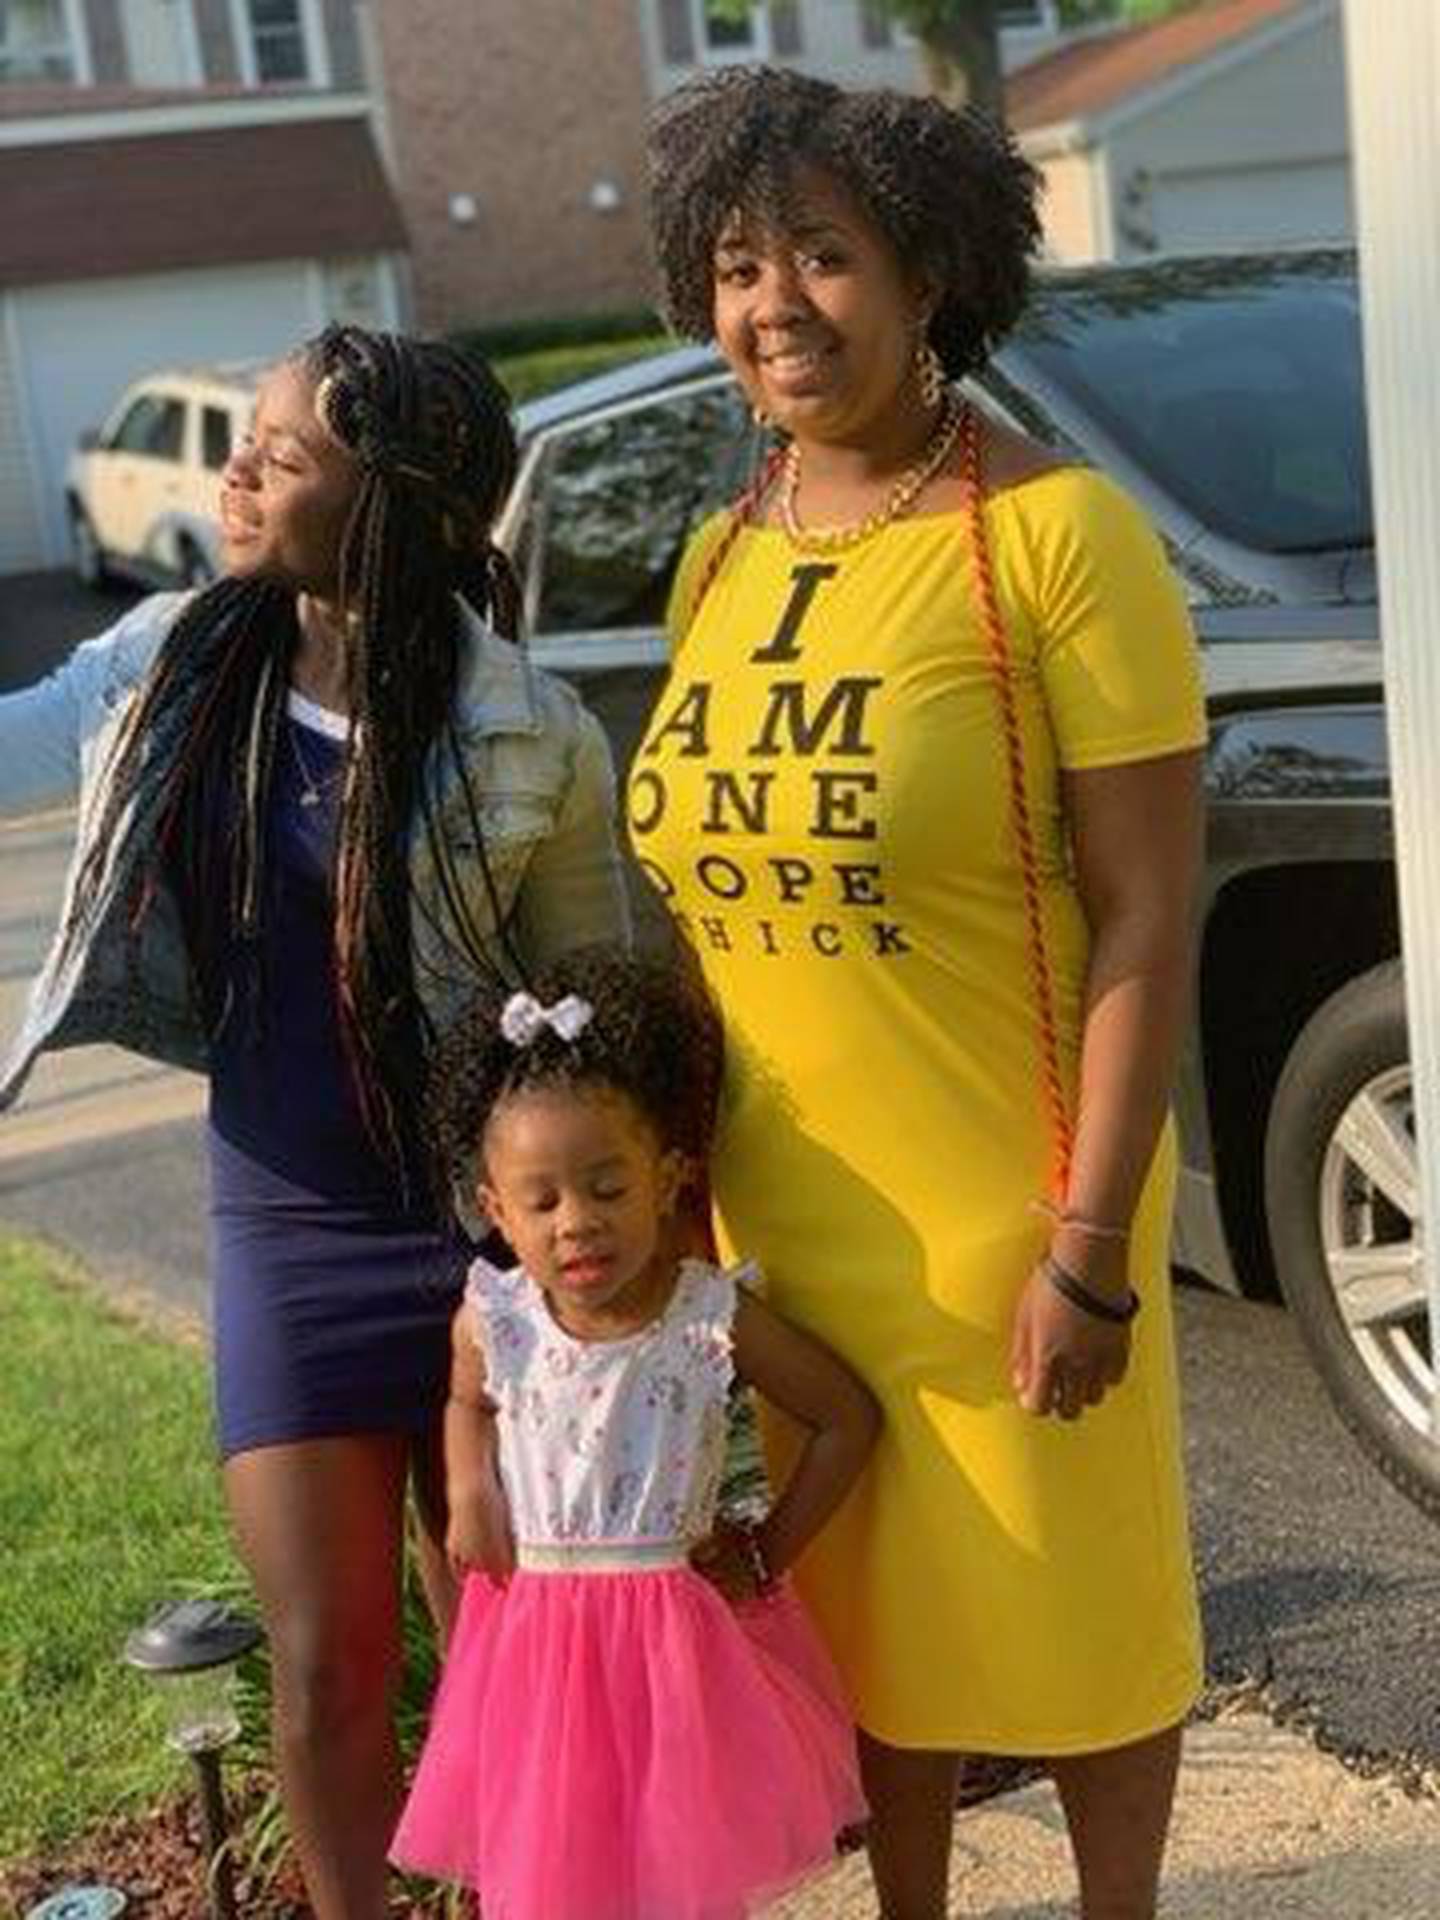 Dykota Morgan, 15, of Bolingbrook was an athlete, artist, activist and scholar. She died of complications from COVID-19 on May 4. She is pictured with her older sister Dyman and her younger sister Layla.